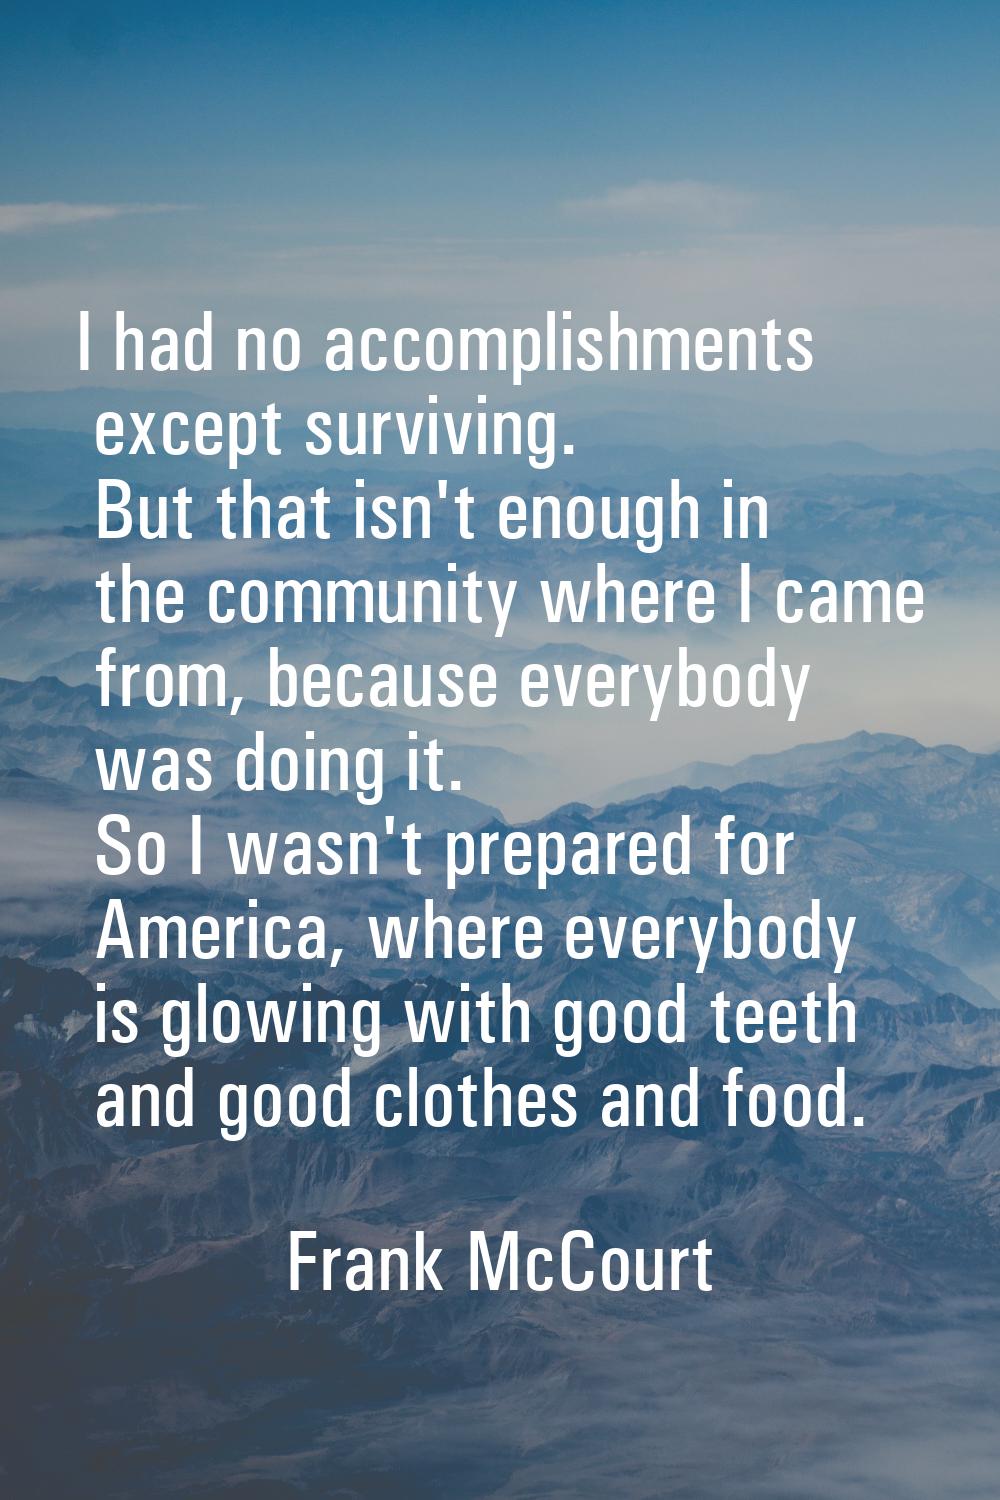 I had no accomplishments except surviving. But that isn't enough in the community where I came from